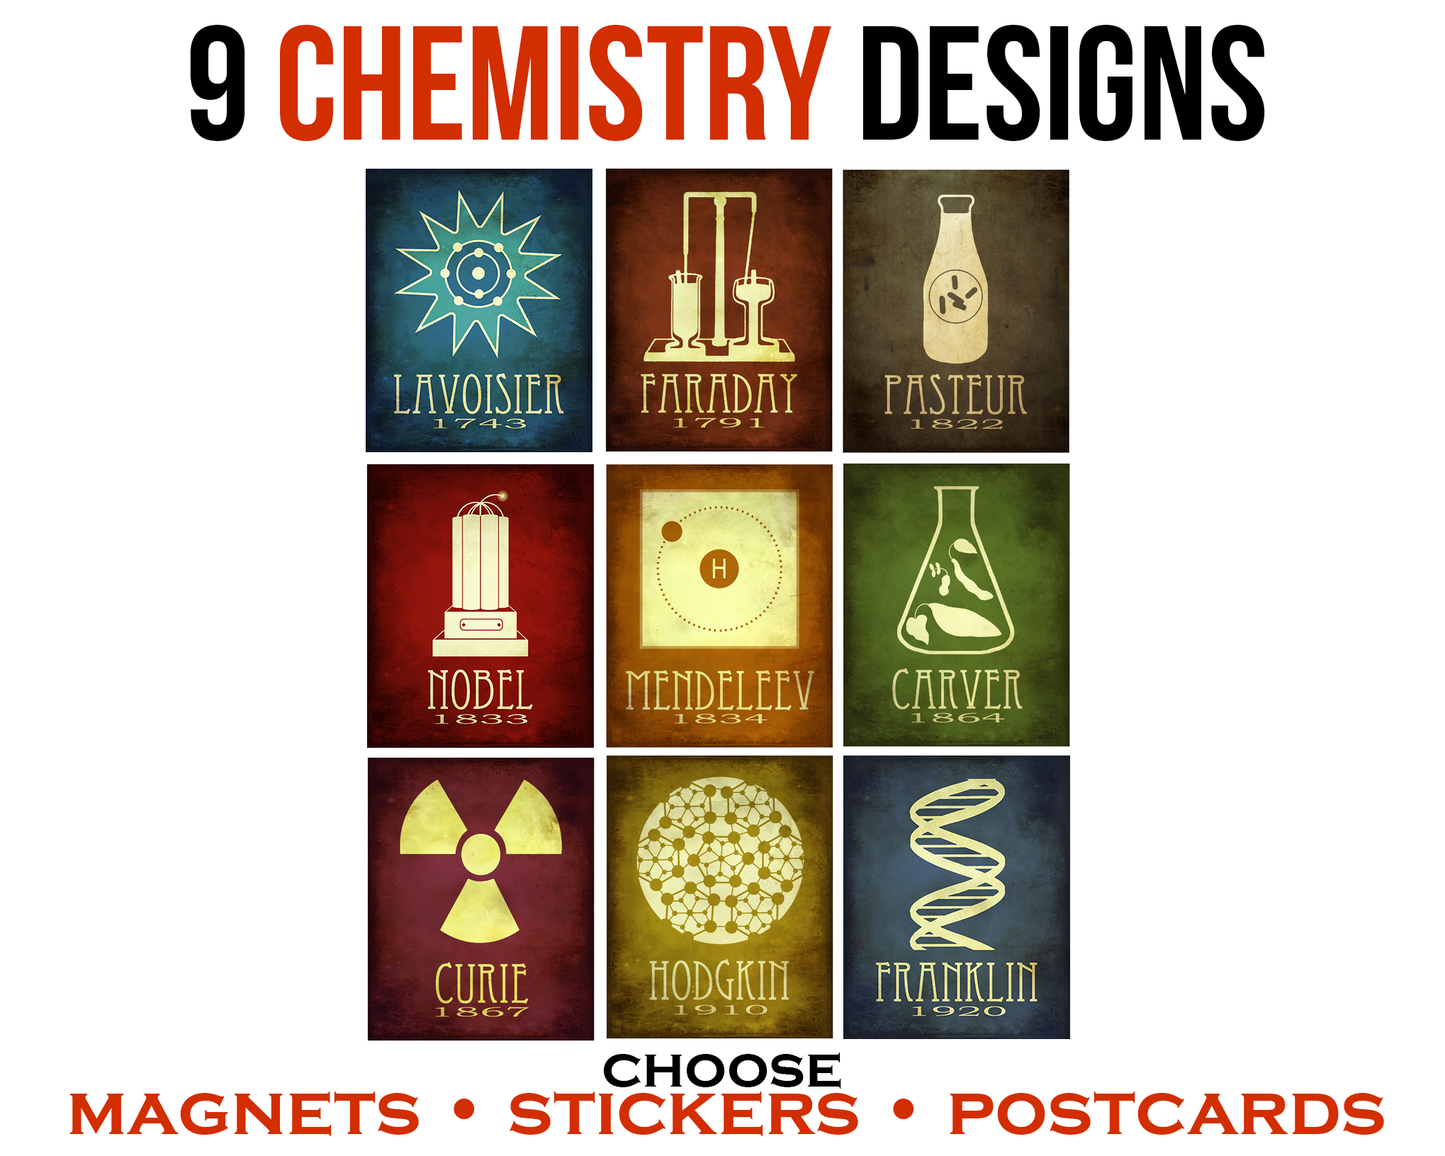 A set of 9 chemistry designs, available as stickers, postcards, or magnets. Designs include Antoine Lavoisier, Michael Faraday, Louis Pasteur, Alfred Nobel, Dmitri Mendeleev, George Washington Carver, Marie Curie, Dorothy Hodgkin, and Rosalind Franklin.